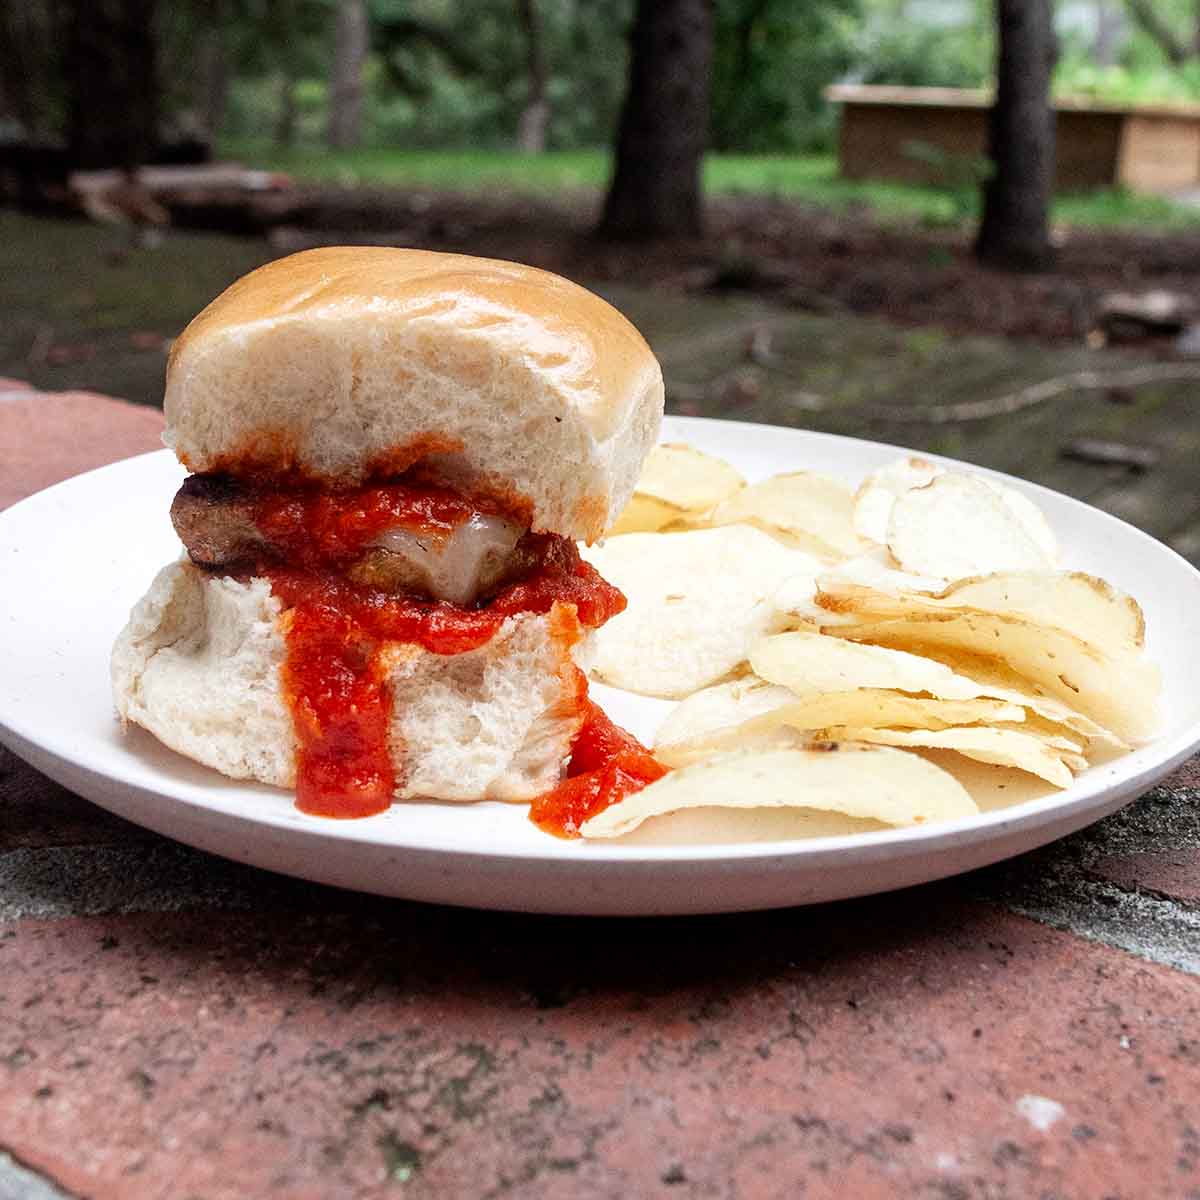 An Italian sausage slider topped with marinara on a plate with potato chips on the side.